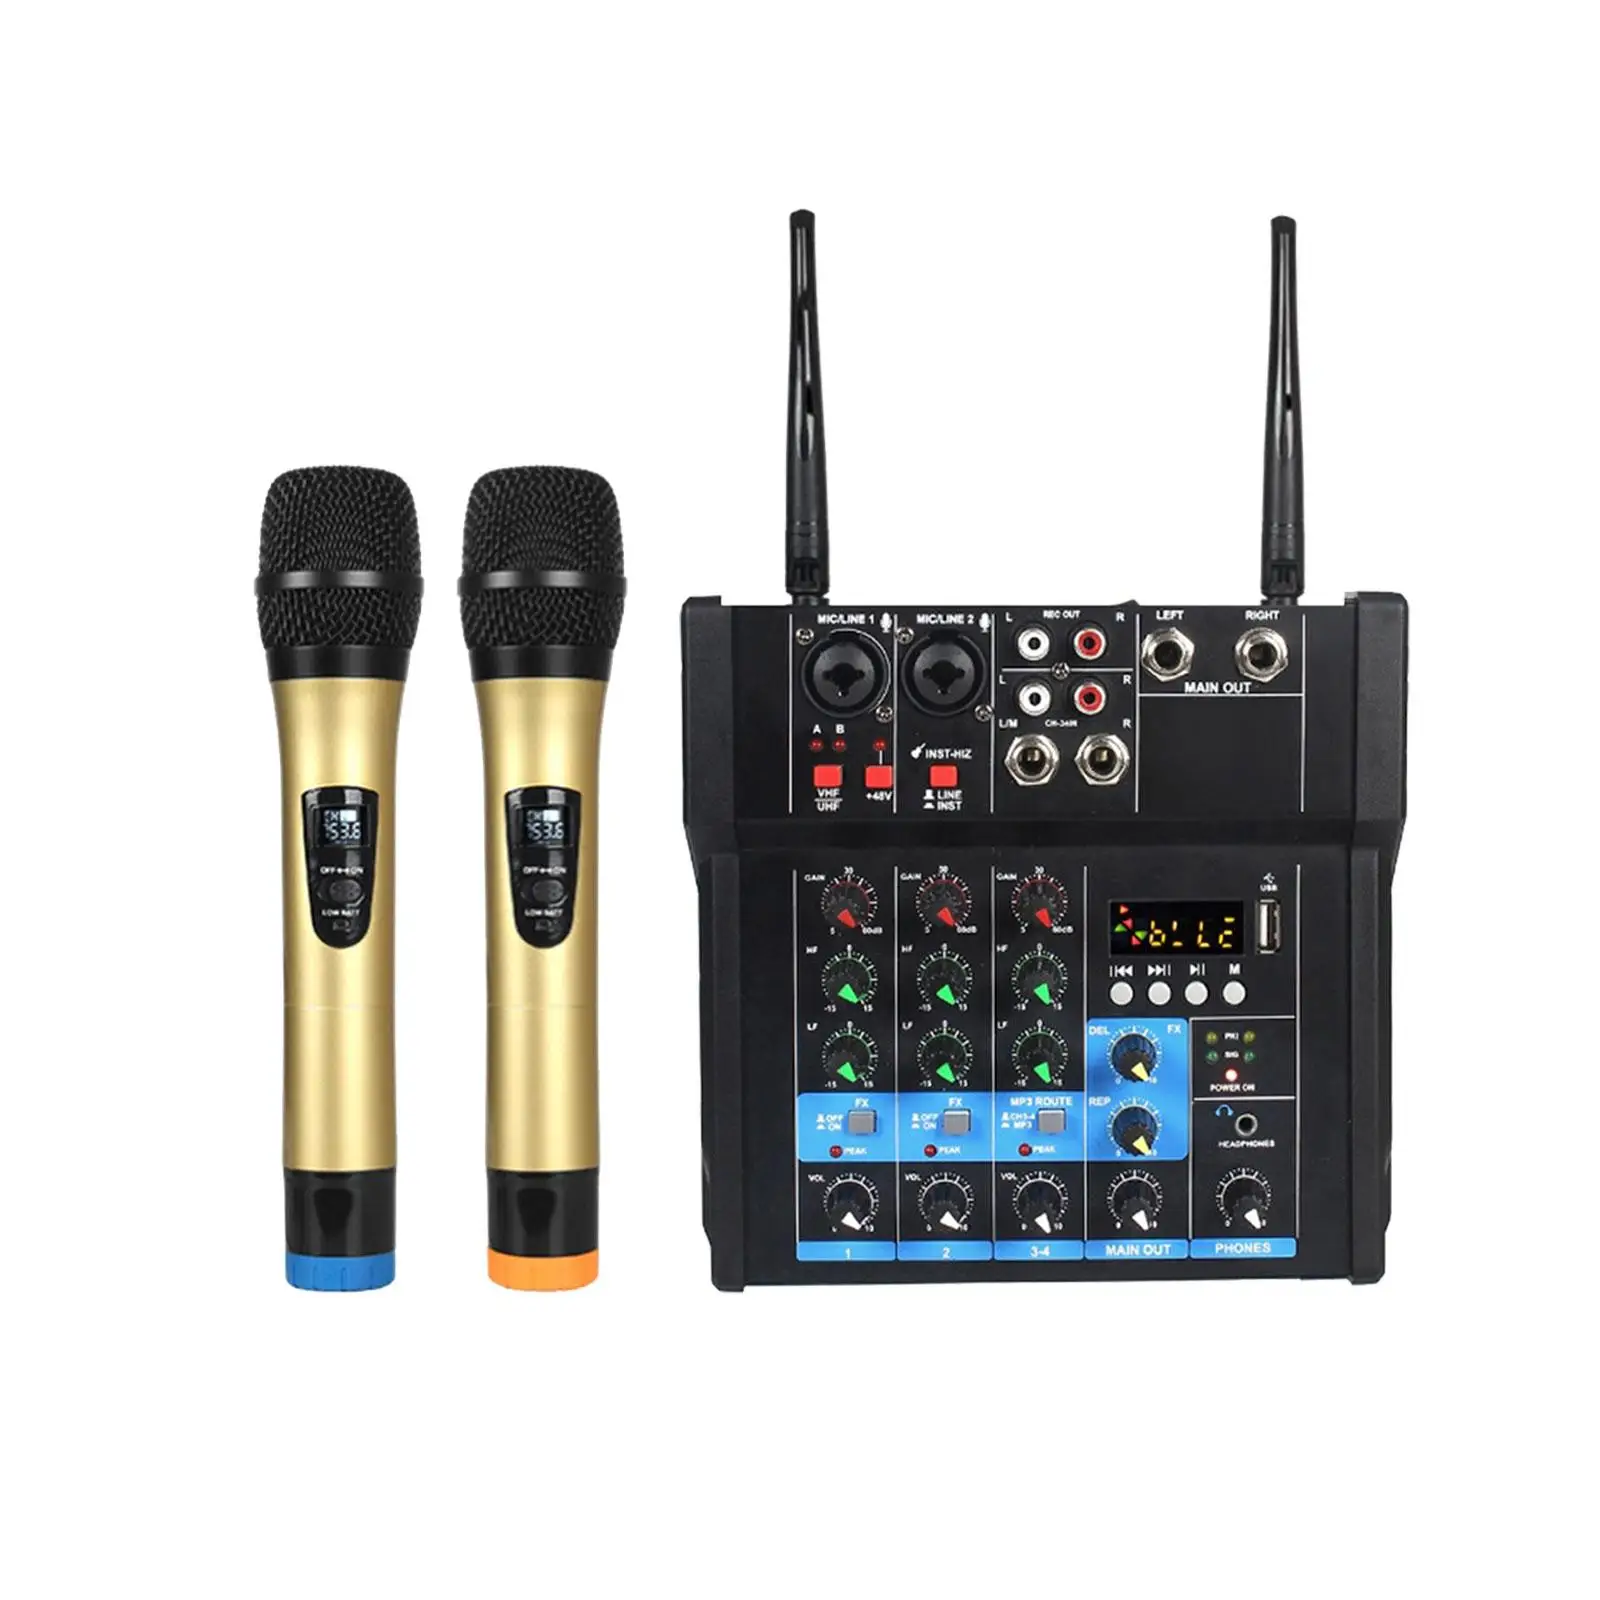 Audio Mixer with 2 Wireless Microphones USB 4 Channel Sound Mixer for Studio Computer Recording Home Karaoke KTV Live Streaming